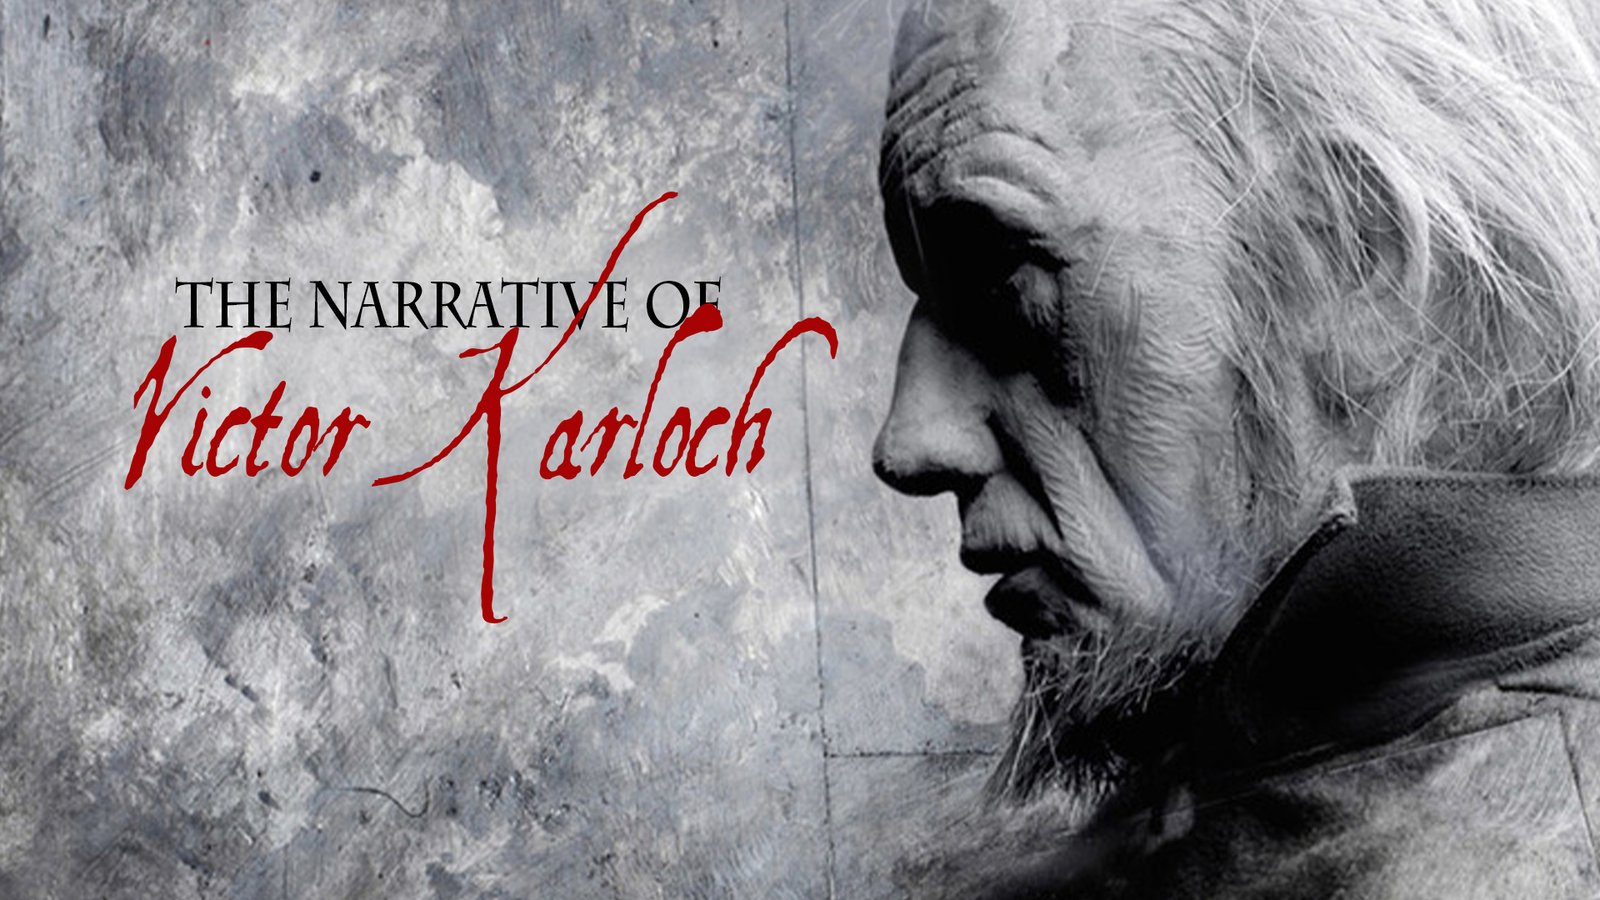 The Narrative of Victor Karloch